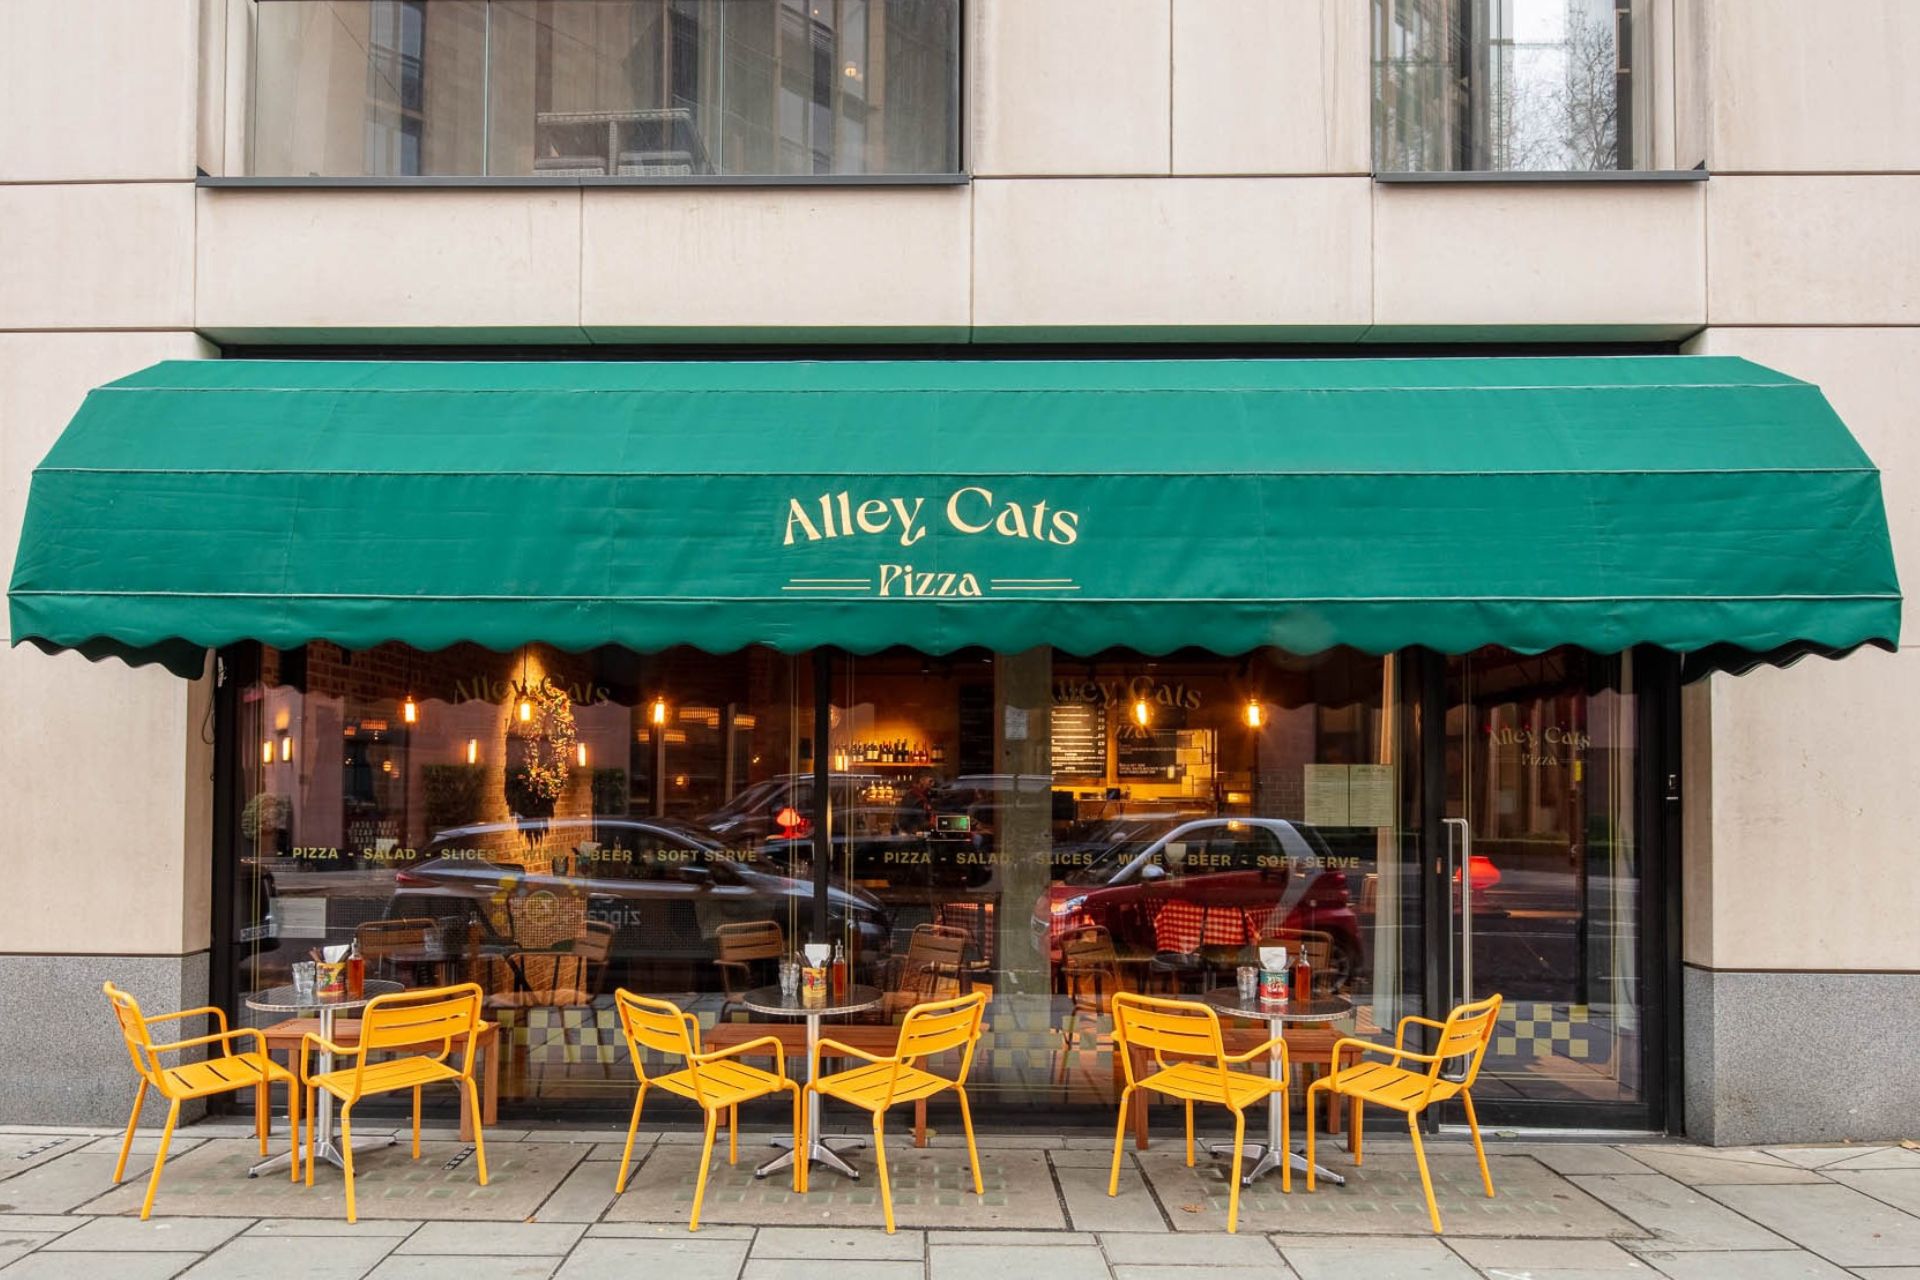 Exterior of Alley Cats, with a dark green awning and yellow outdoor furniture,